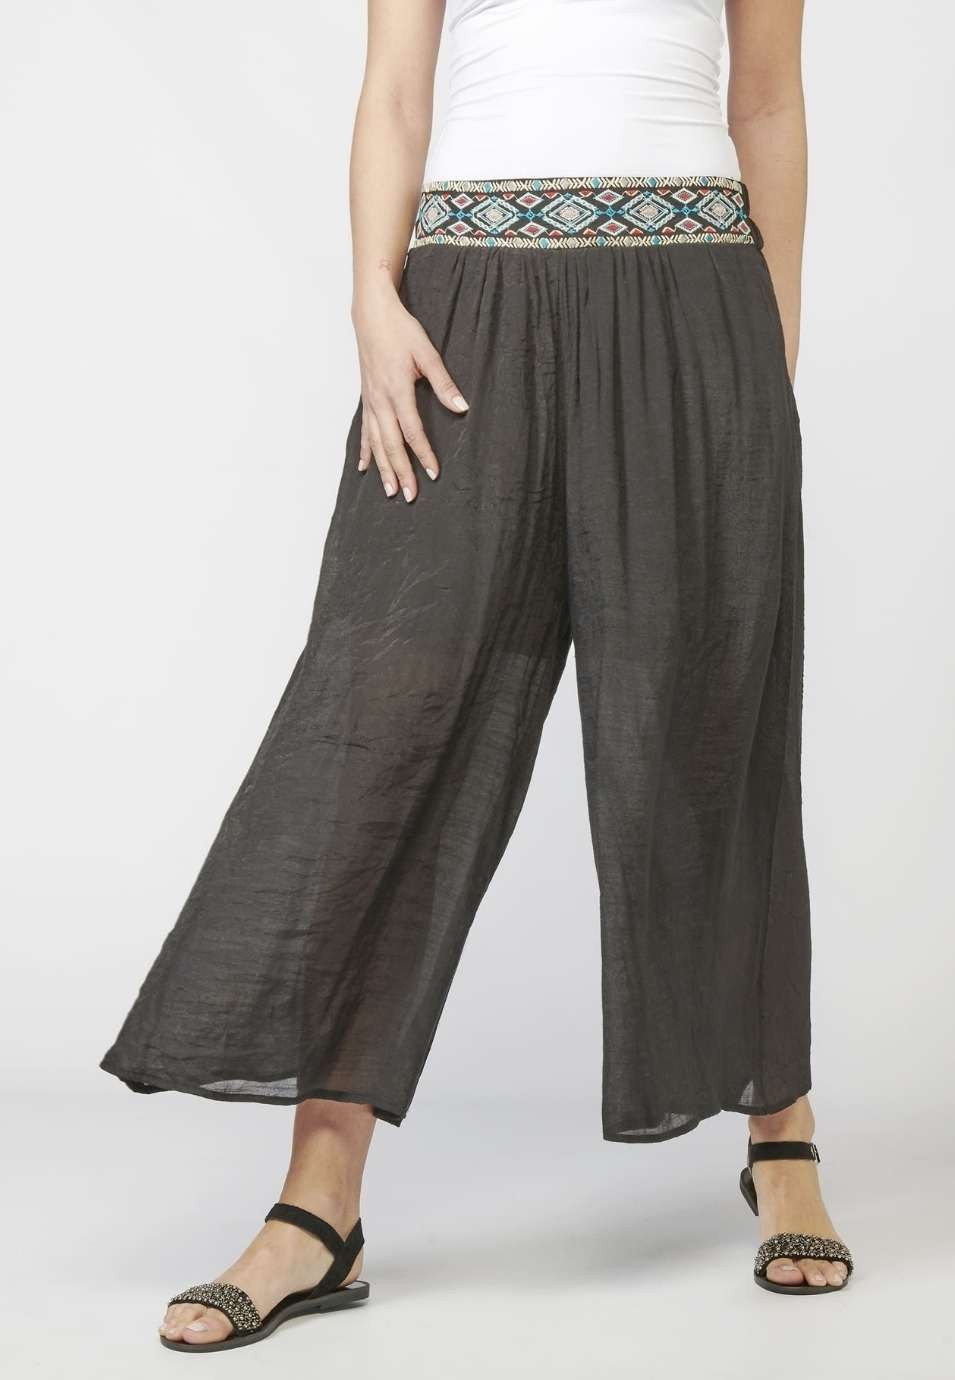 Women's long elastic trousers with sash and Ethnic Embroidered Detail in Black color